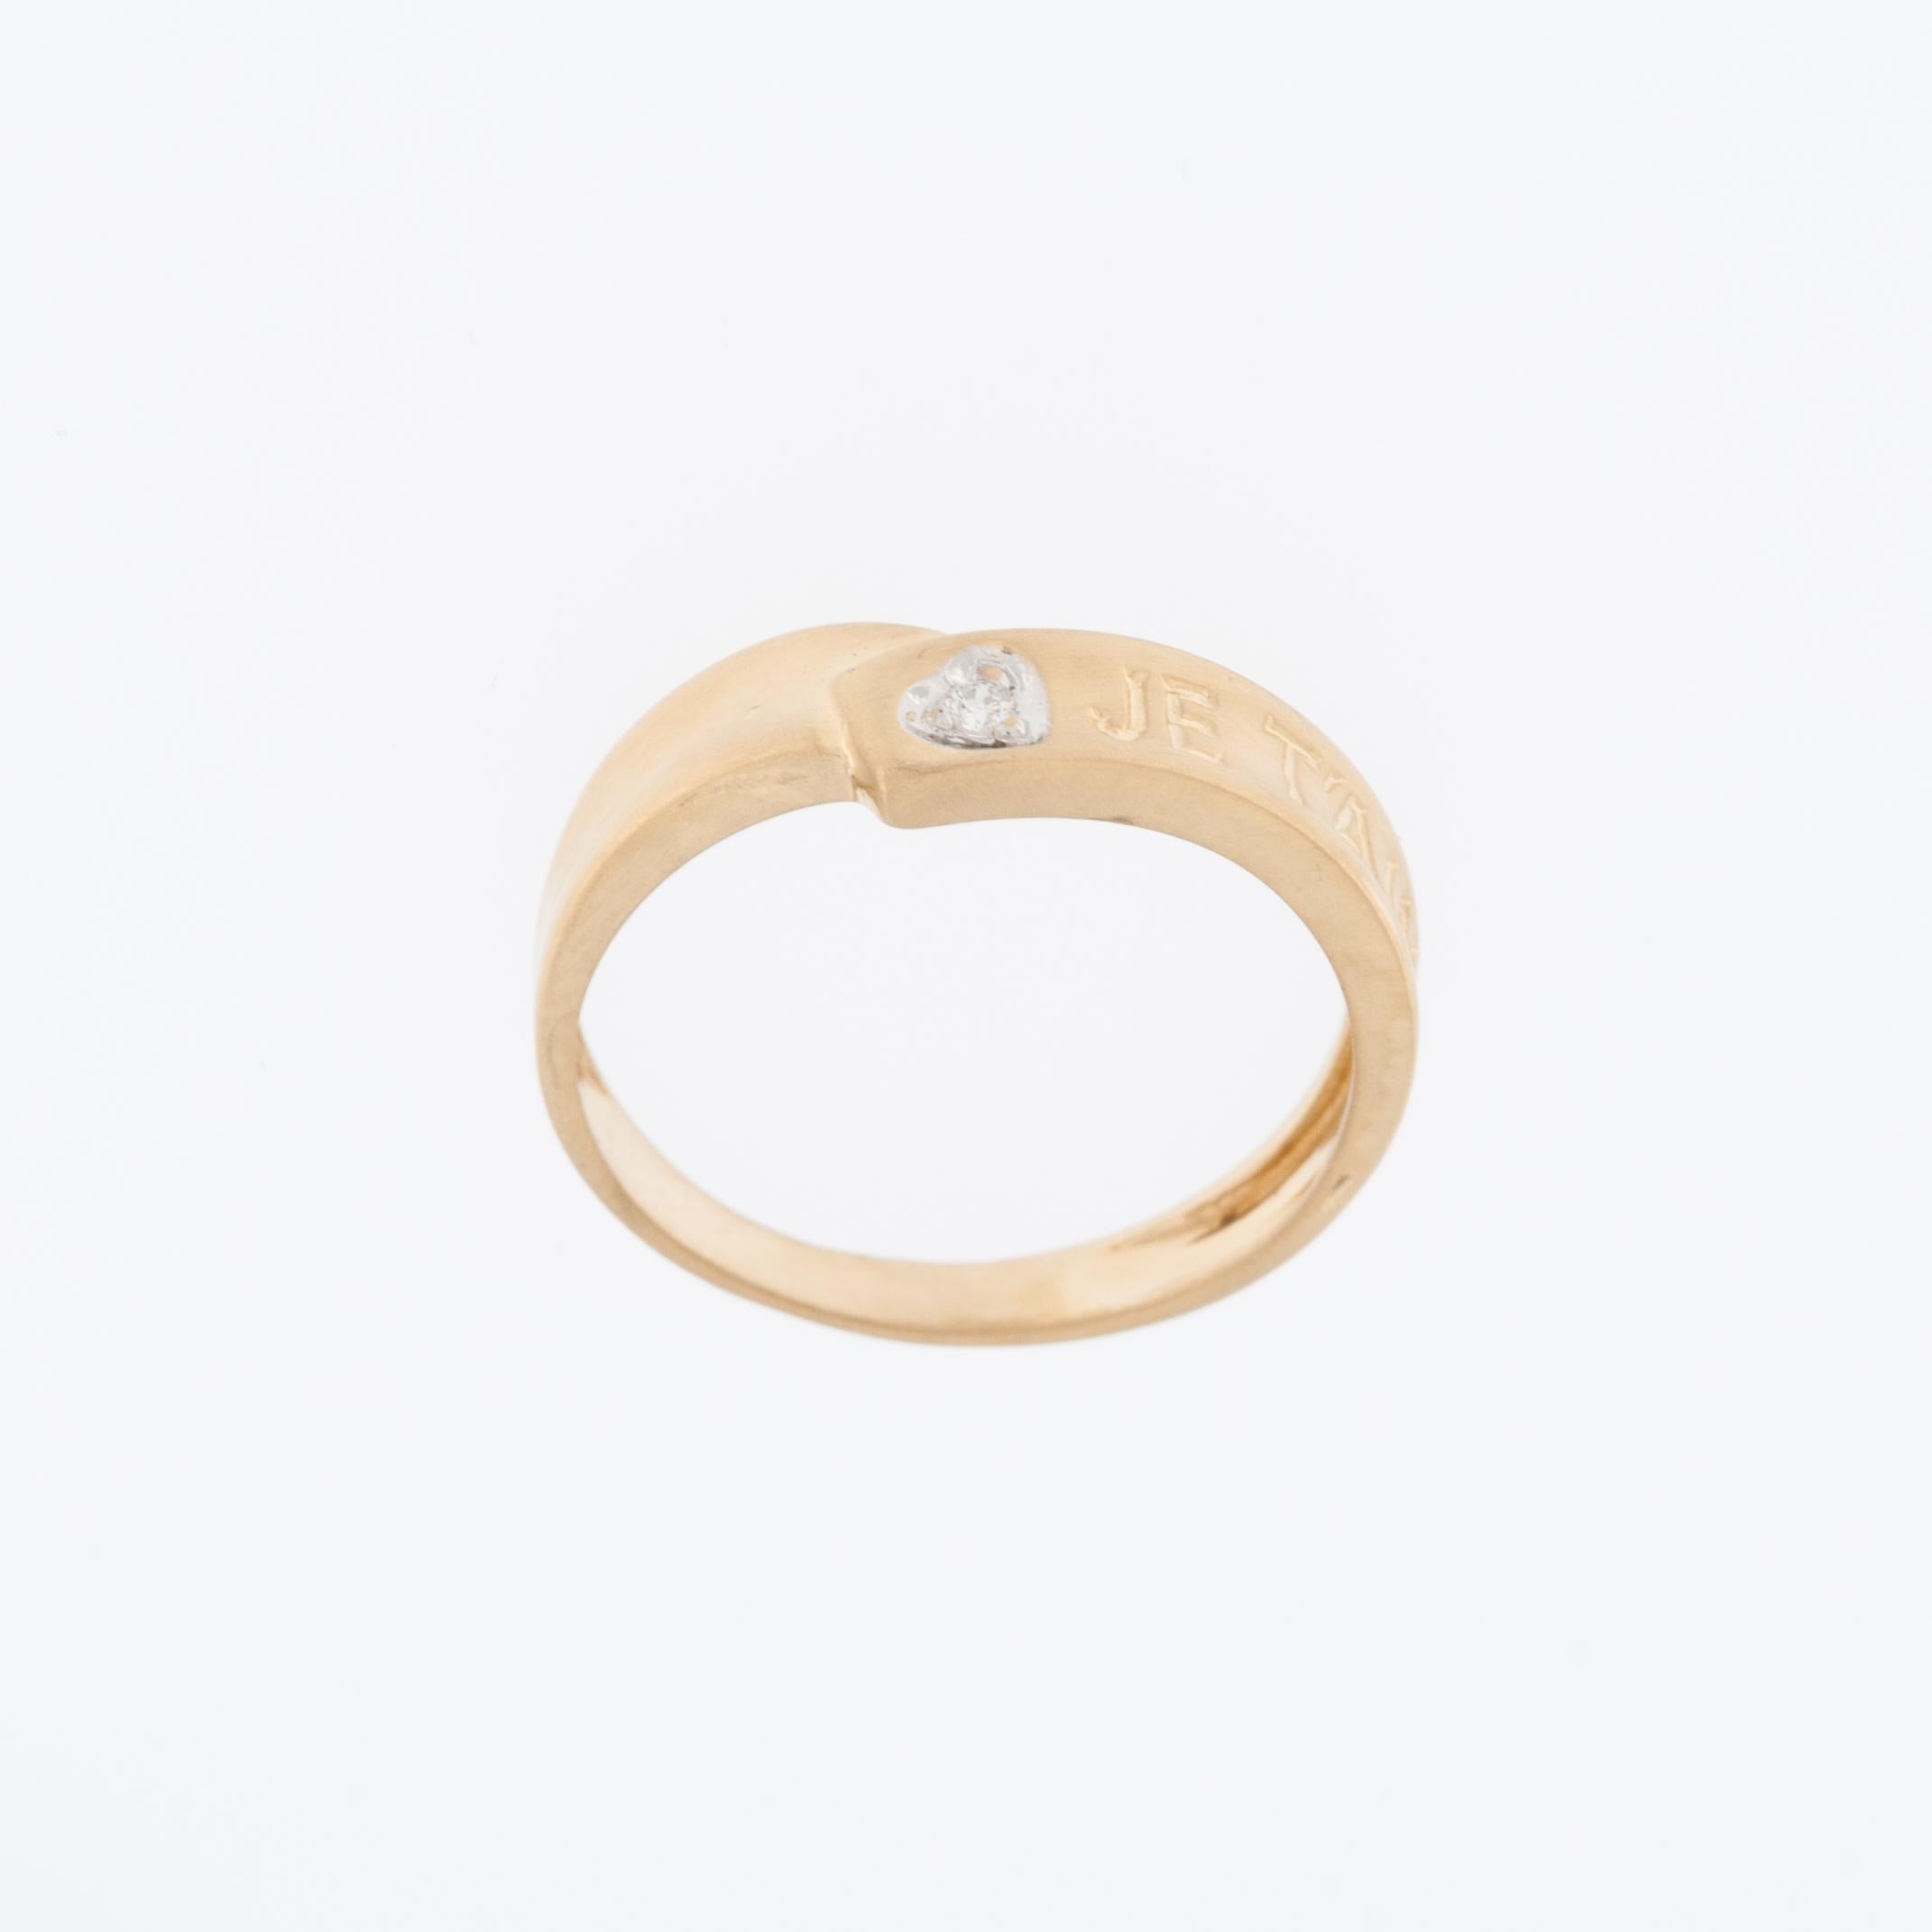 This exquisite Love Ring Band is a symbol of romance and sophistication, crafted with meticulous attention to detail. The band is made from high-quality 18 karat yellow gold, ensuring both durability and a warm, luxurious appearance.

At the center